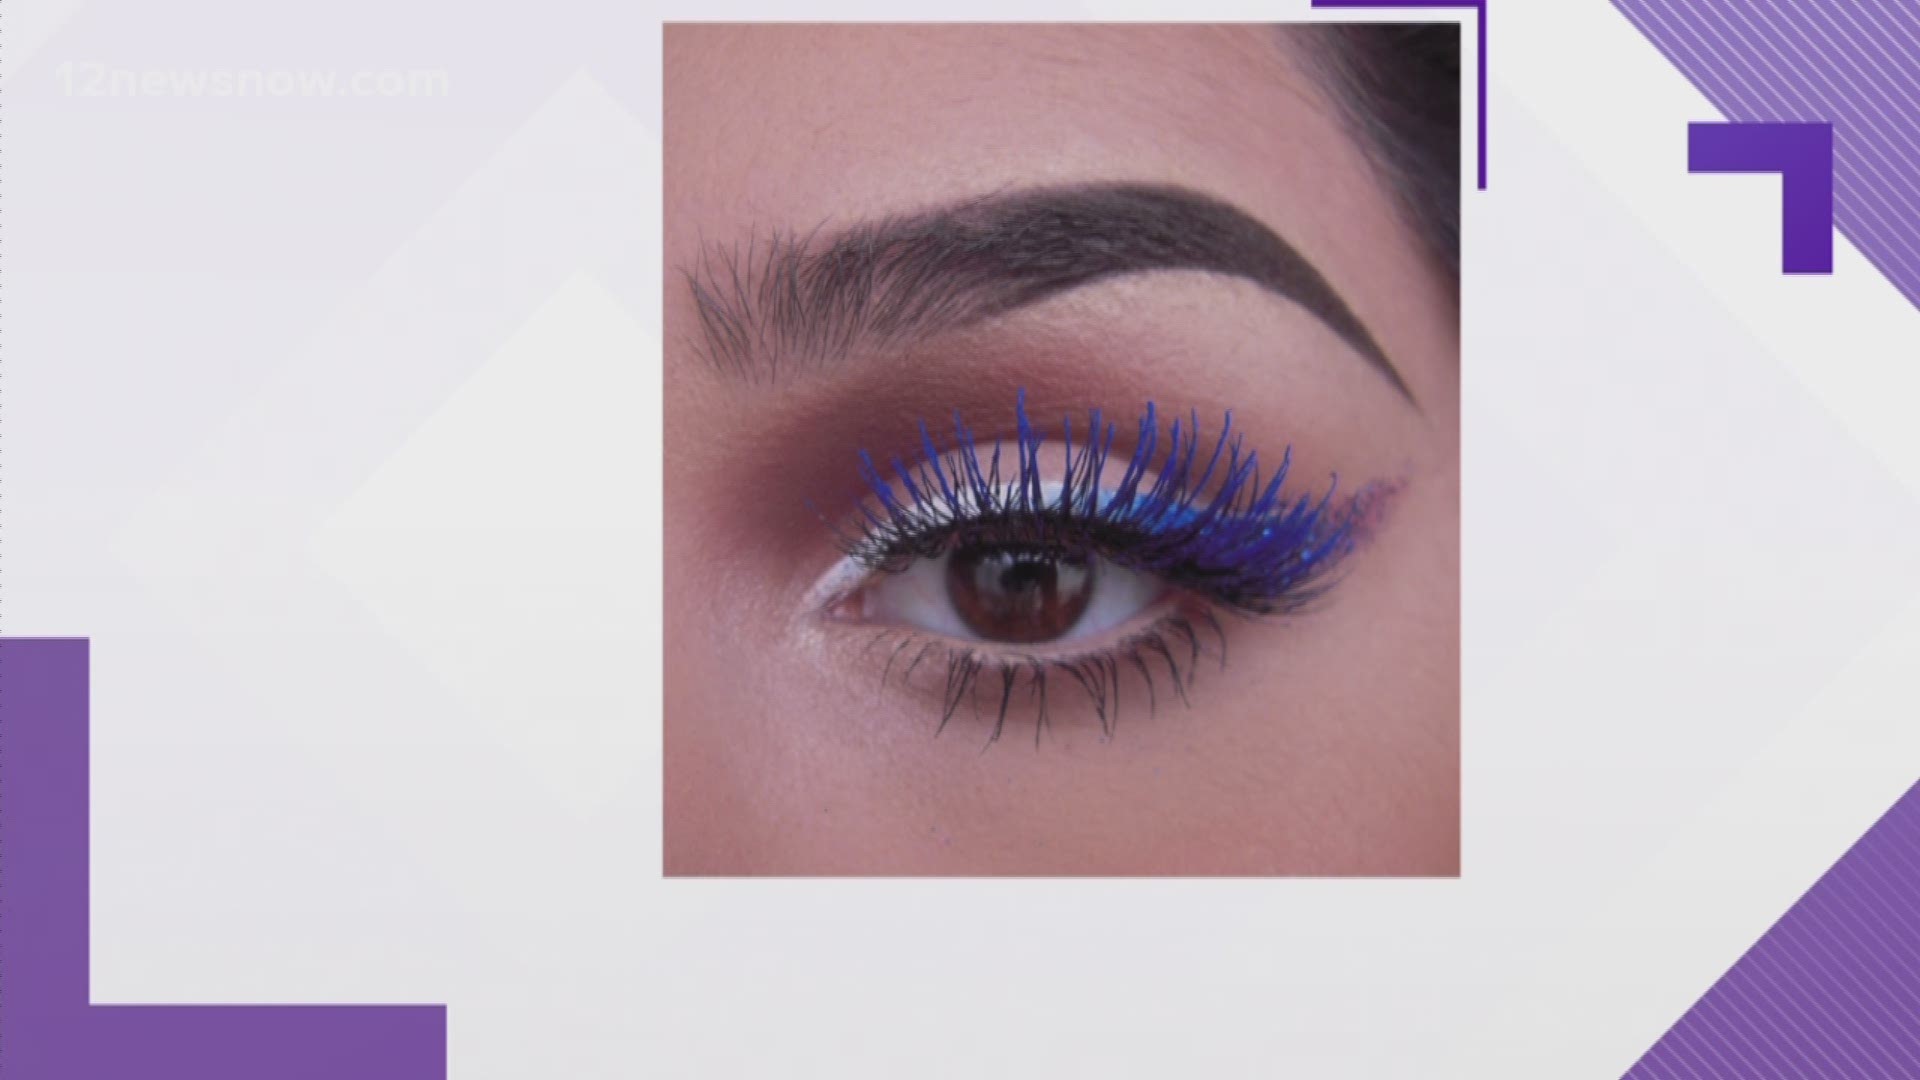 Remember to tweet us pictures of your colorful eyelashes using #TheBeaton12